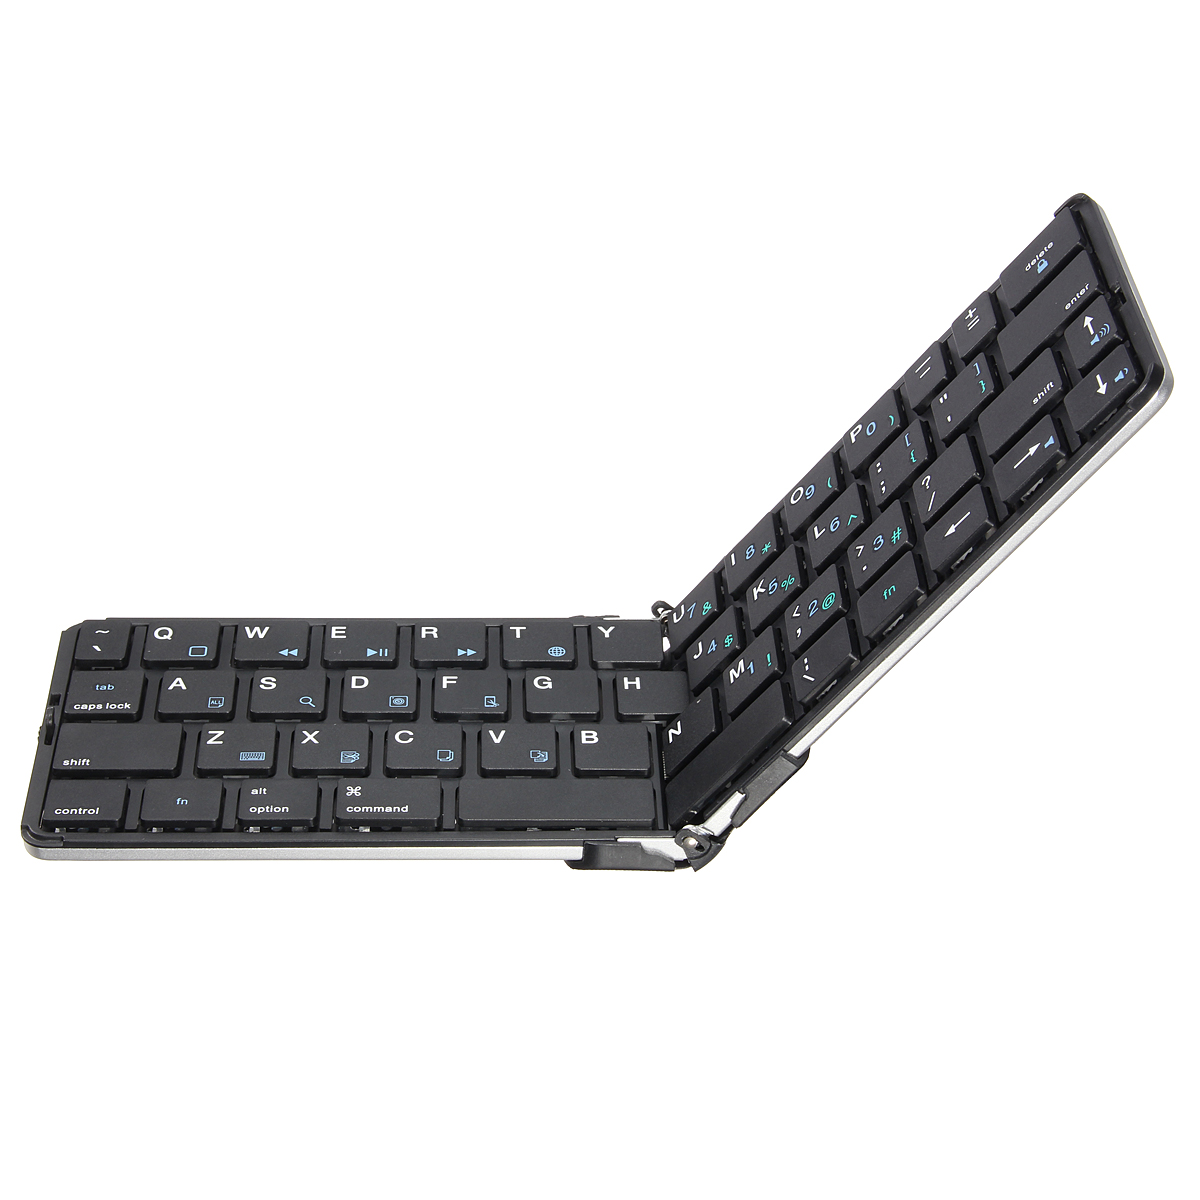 SAWAKE-Folding-BT30-USB-Rechargeable-bluetooth-Wireless-Keyboard-for-iPad-Mobile-Phone-Tablet-PC-iOS-1890387-8